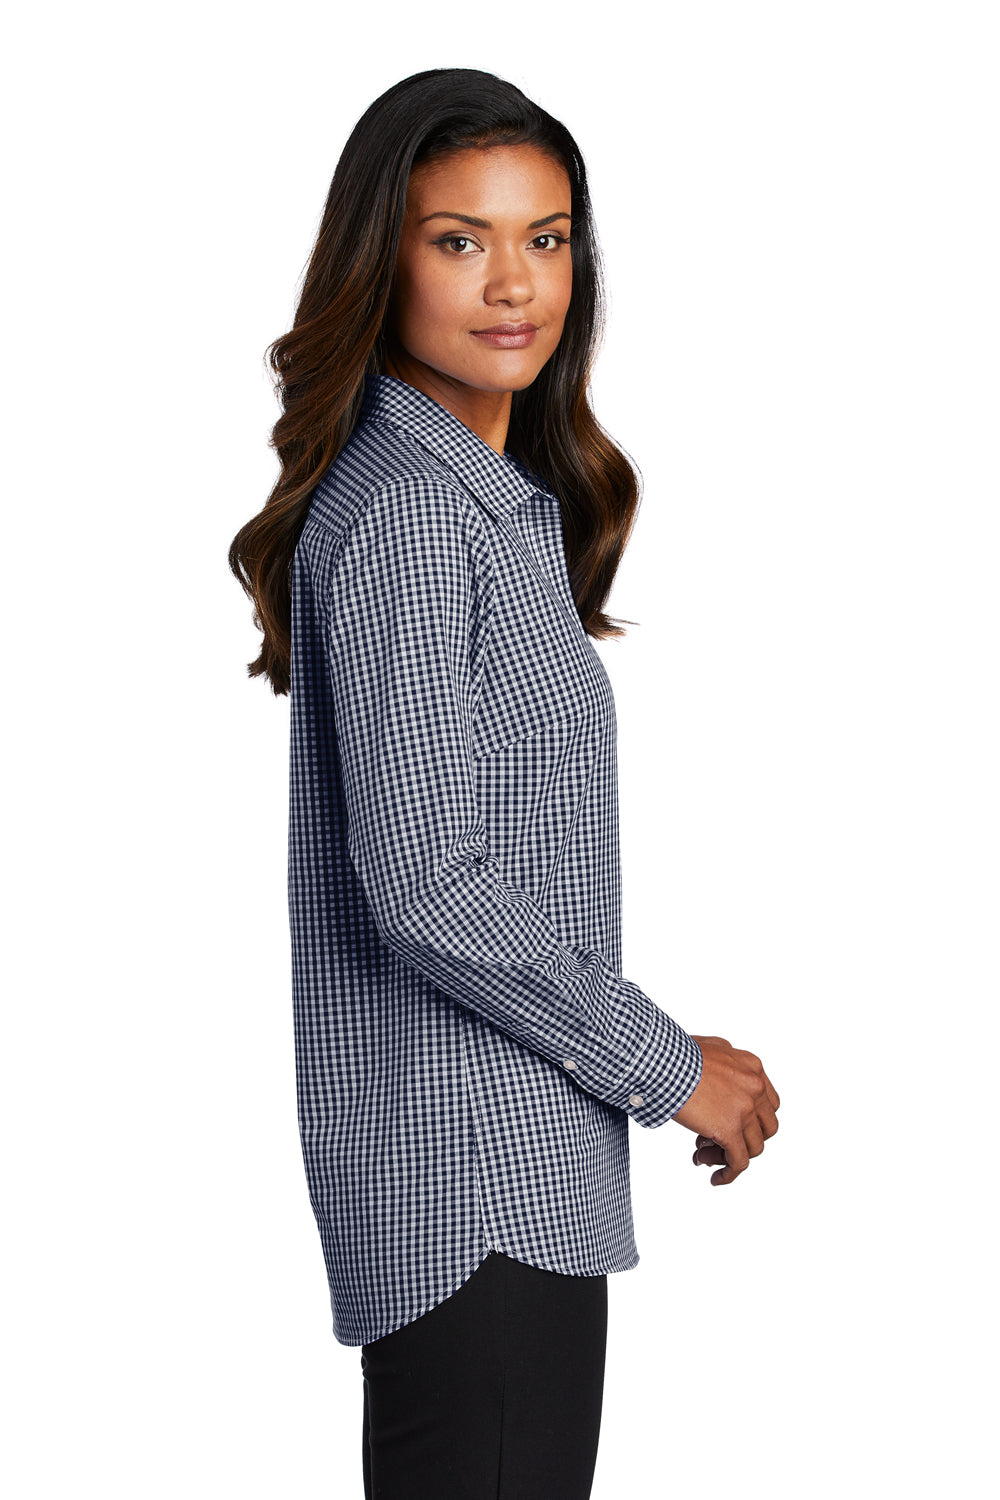 Port Authority Womens Broadcloth Gingham Long Sleeve Button Down Shirt True Navy Blue/White Side